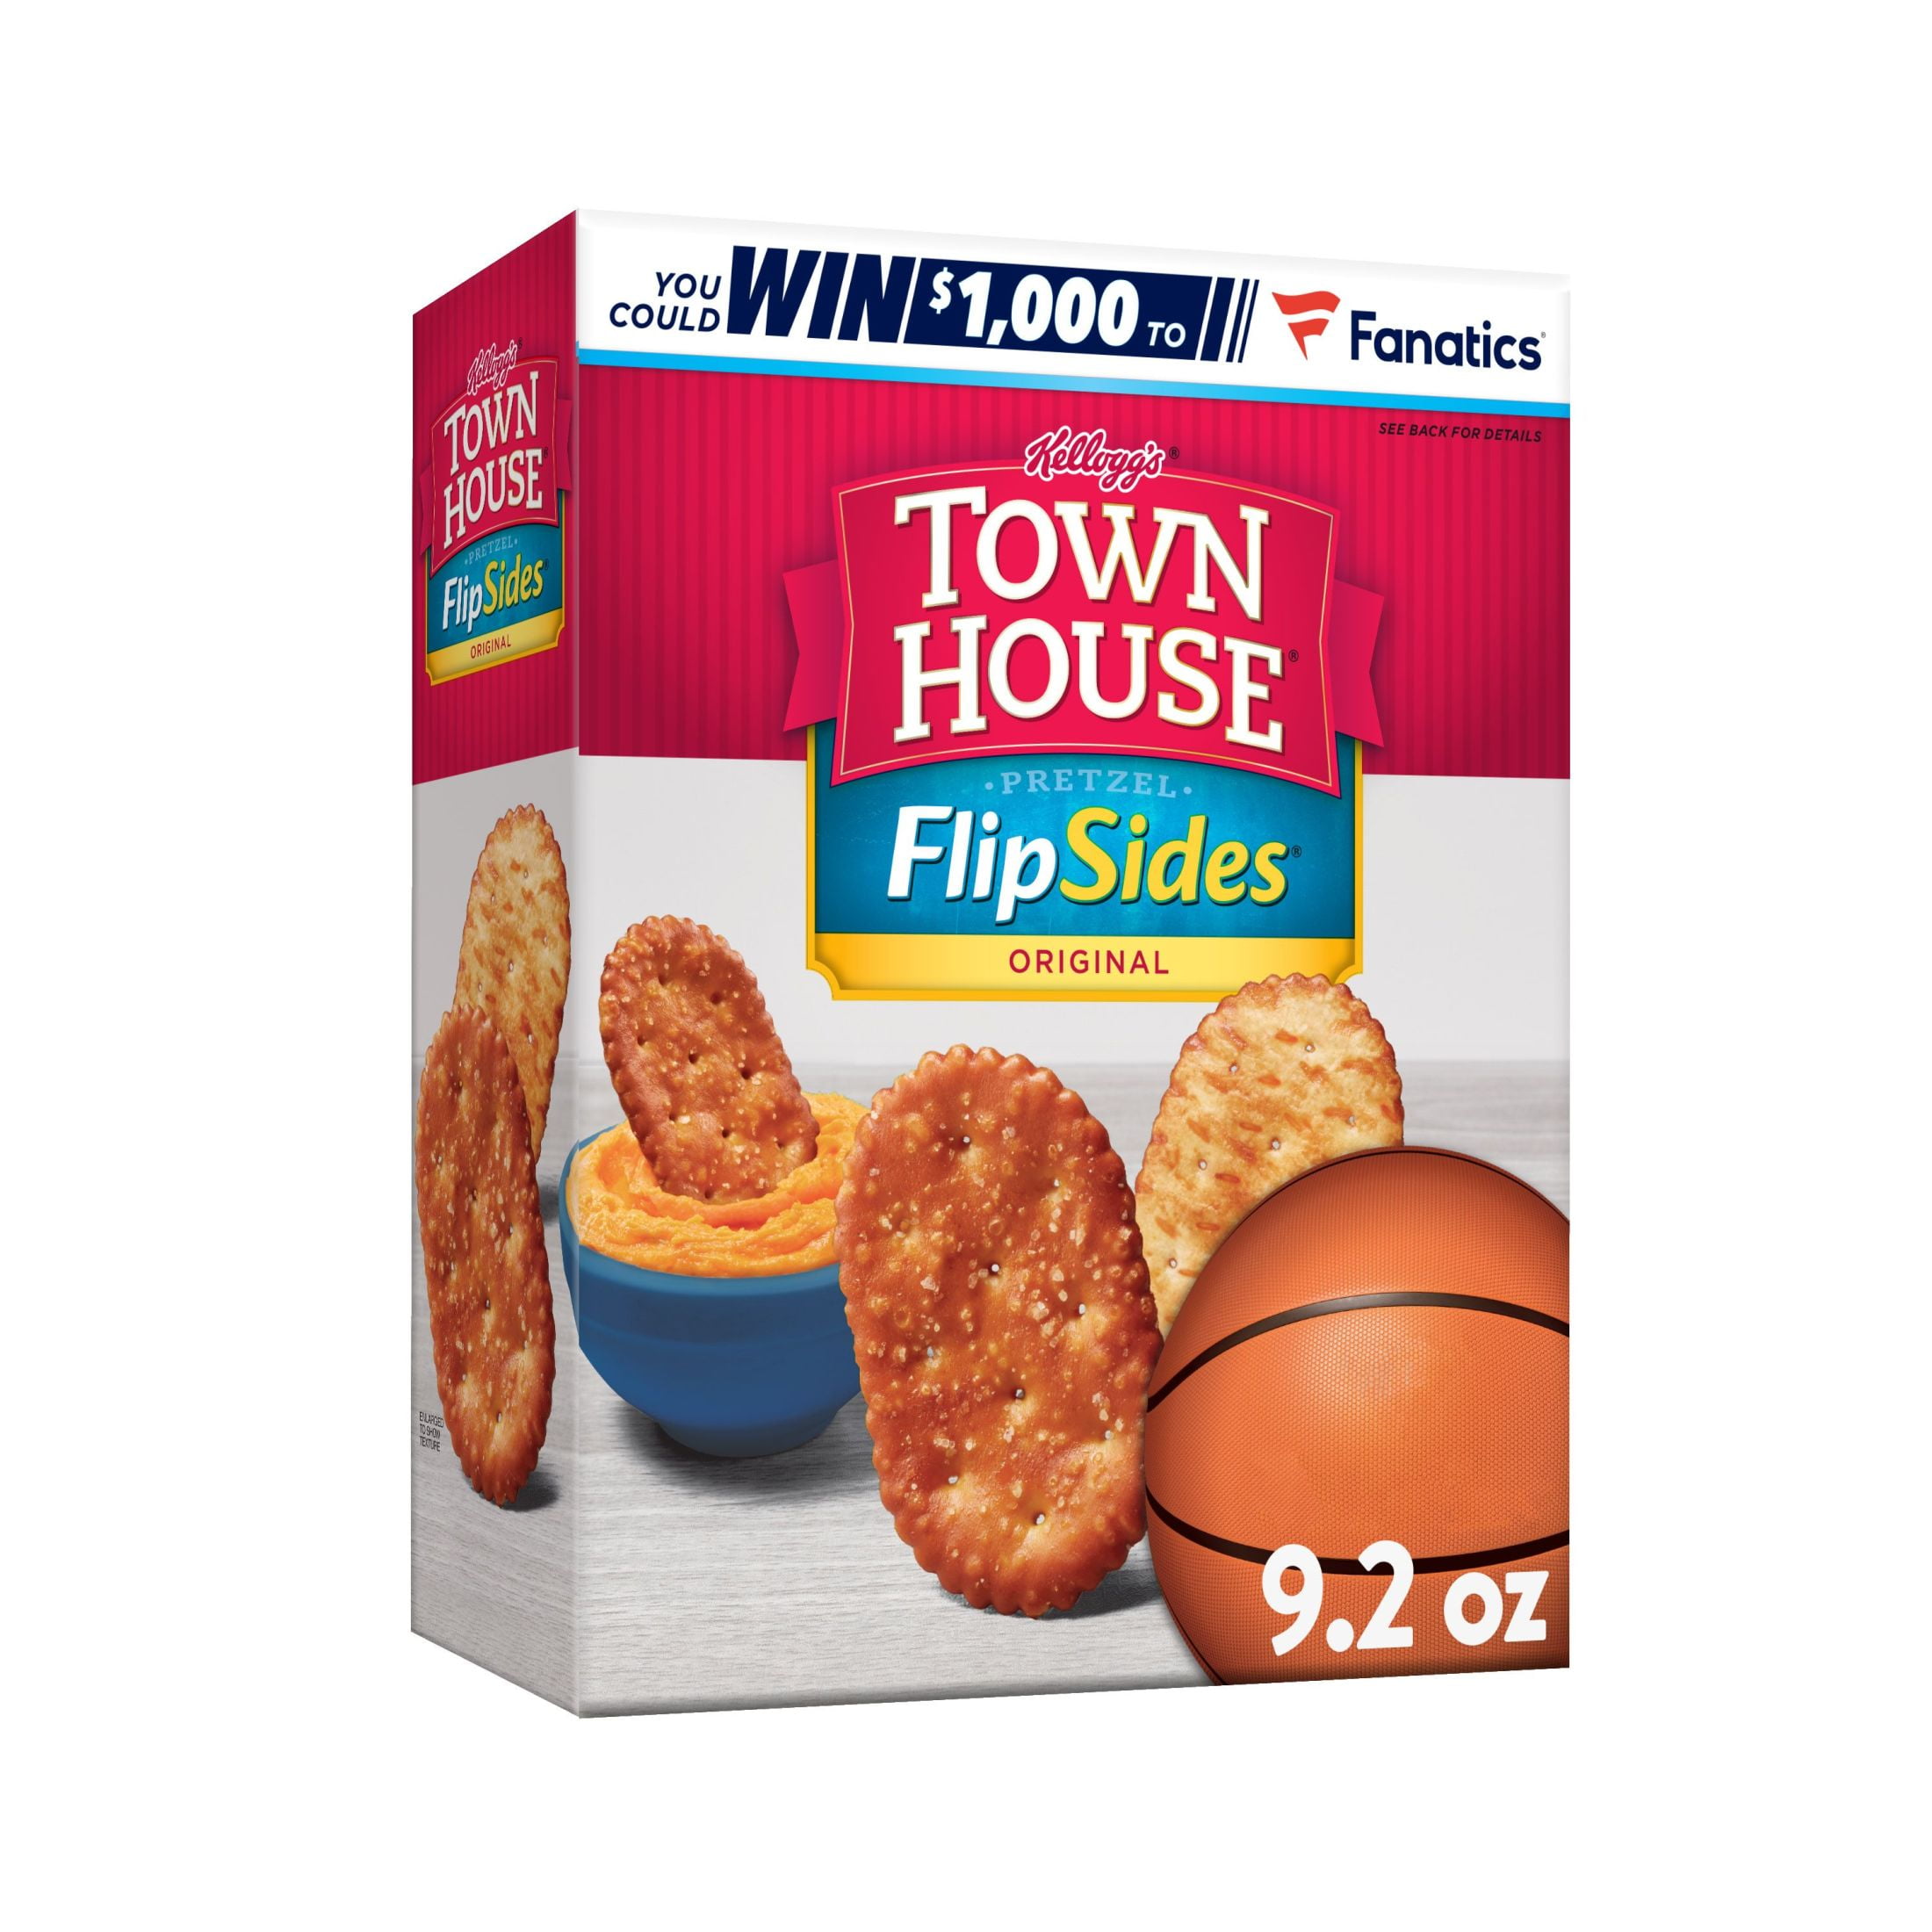 Town House FlipSides Original Oven Baked Crackers, 9.2 oz